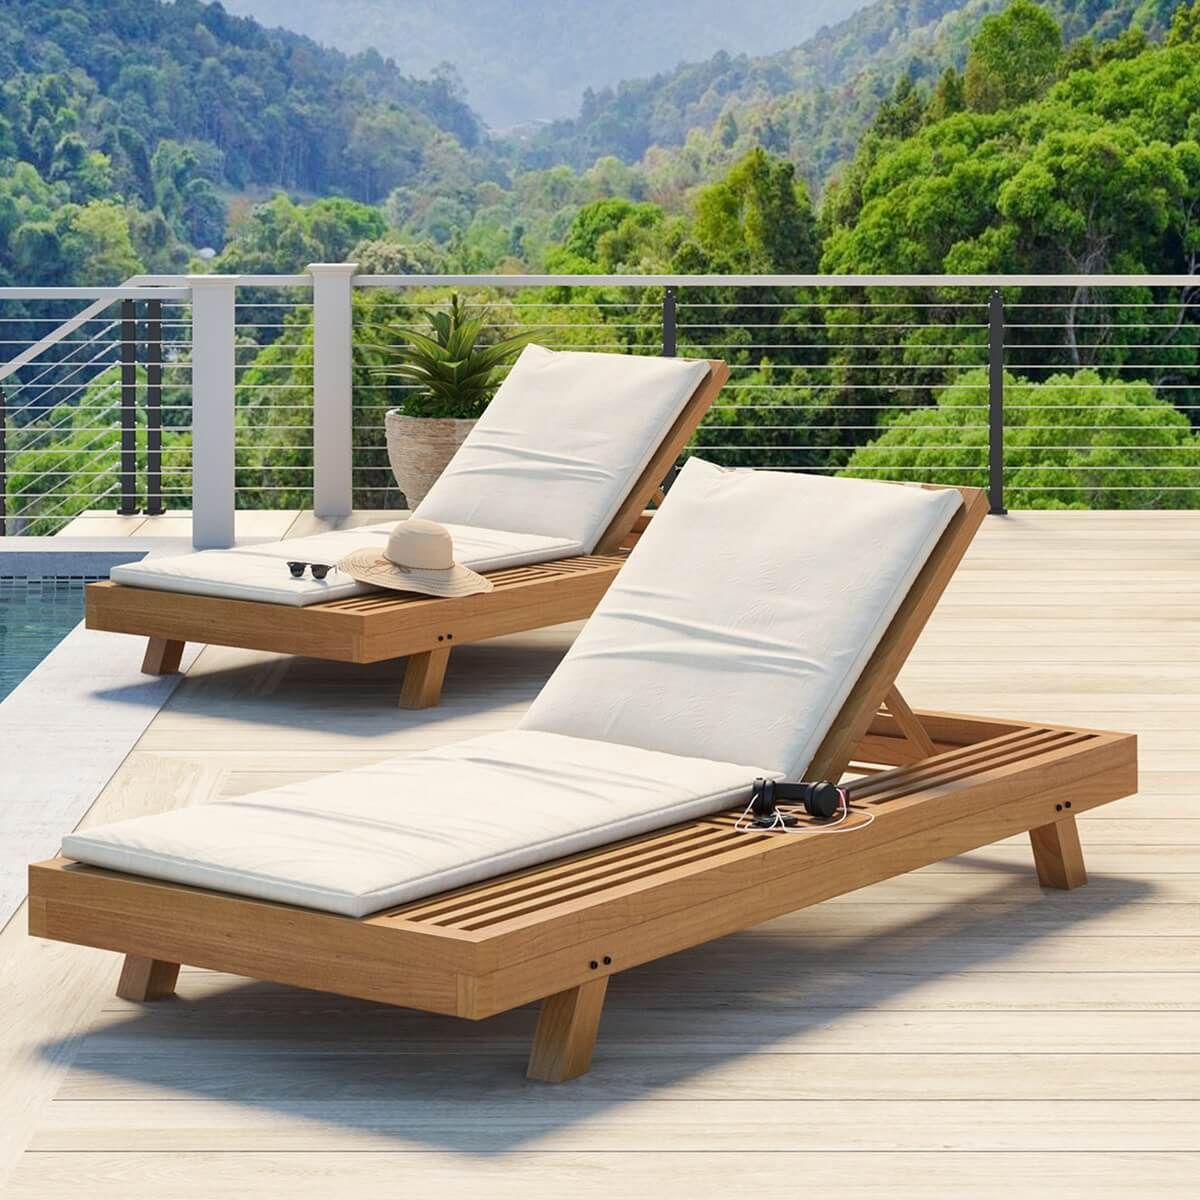 The Timeless Elegance of Teak Furniture for Outdoor Spaces